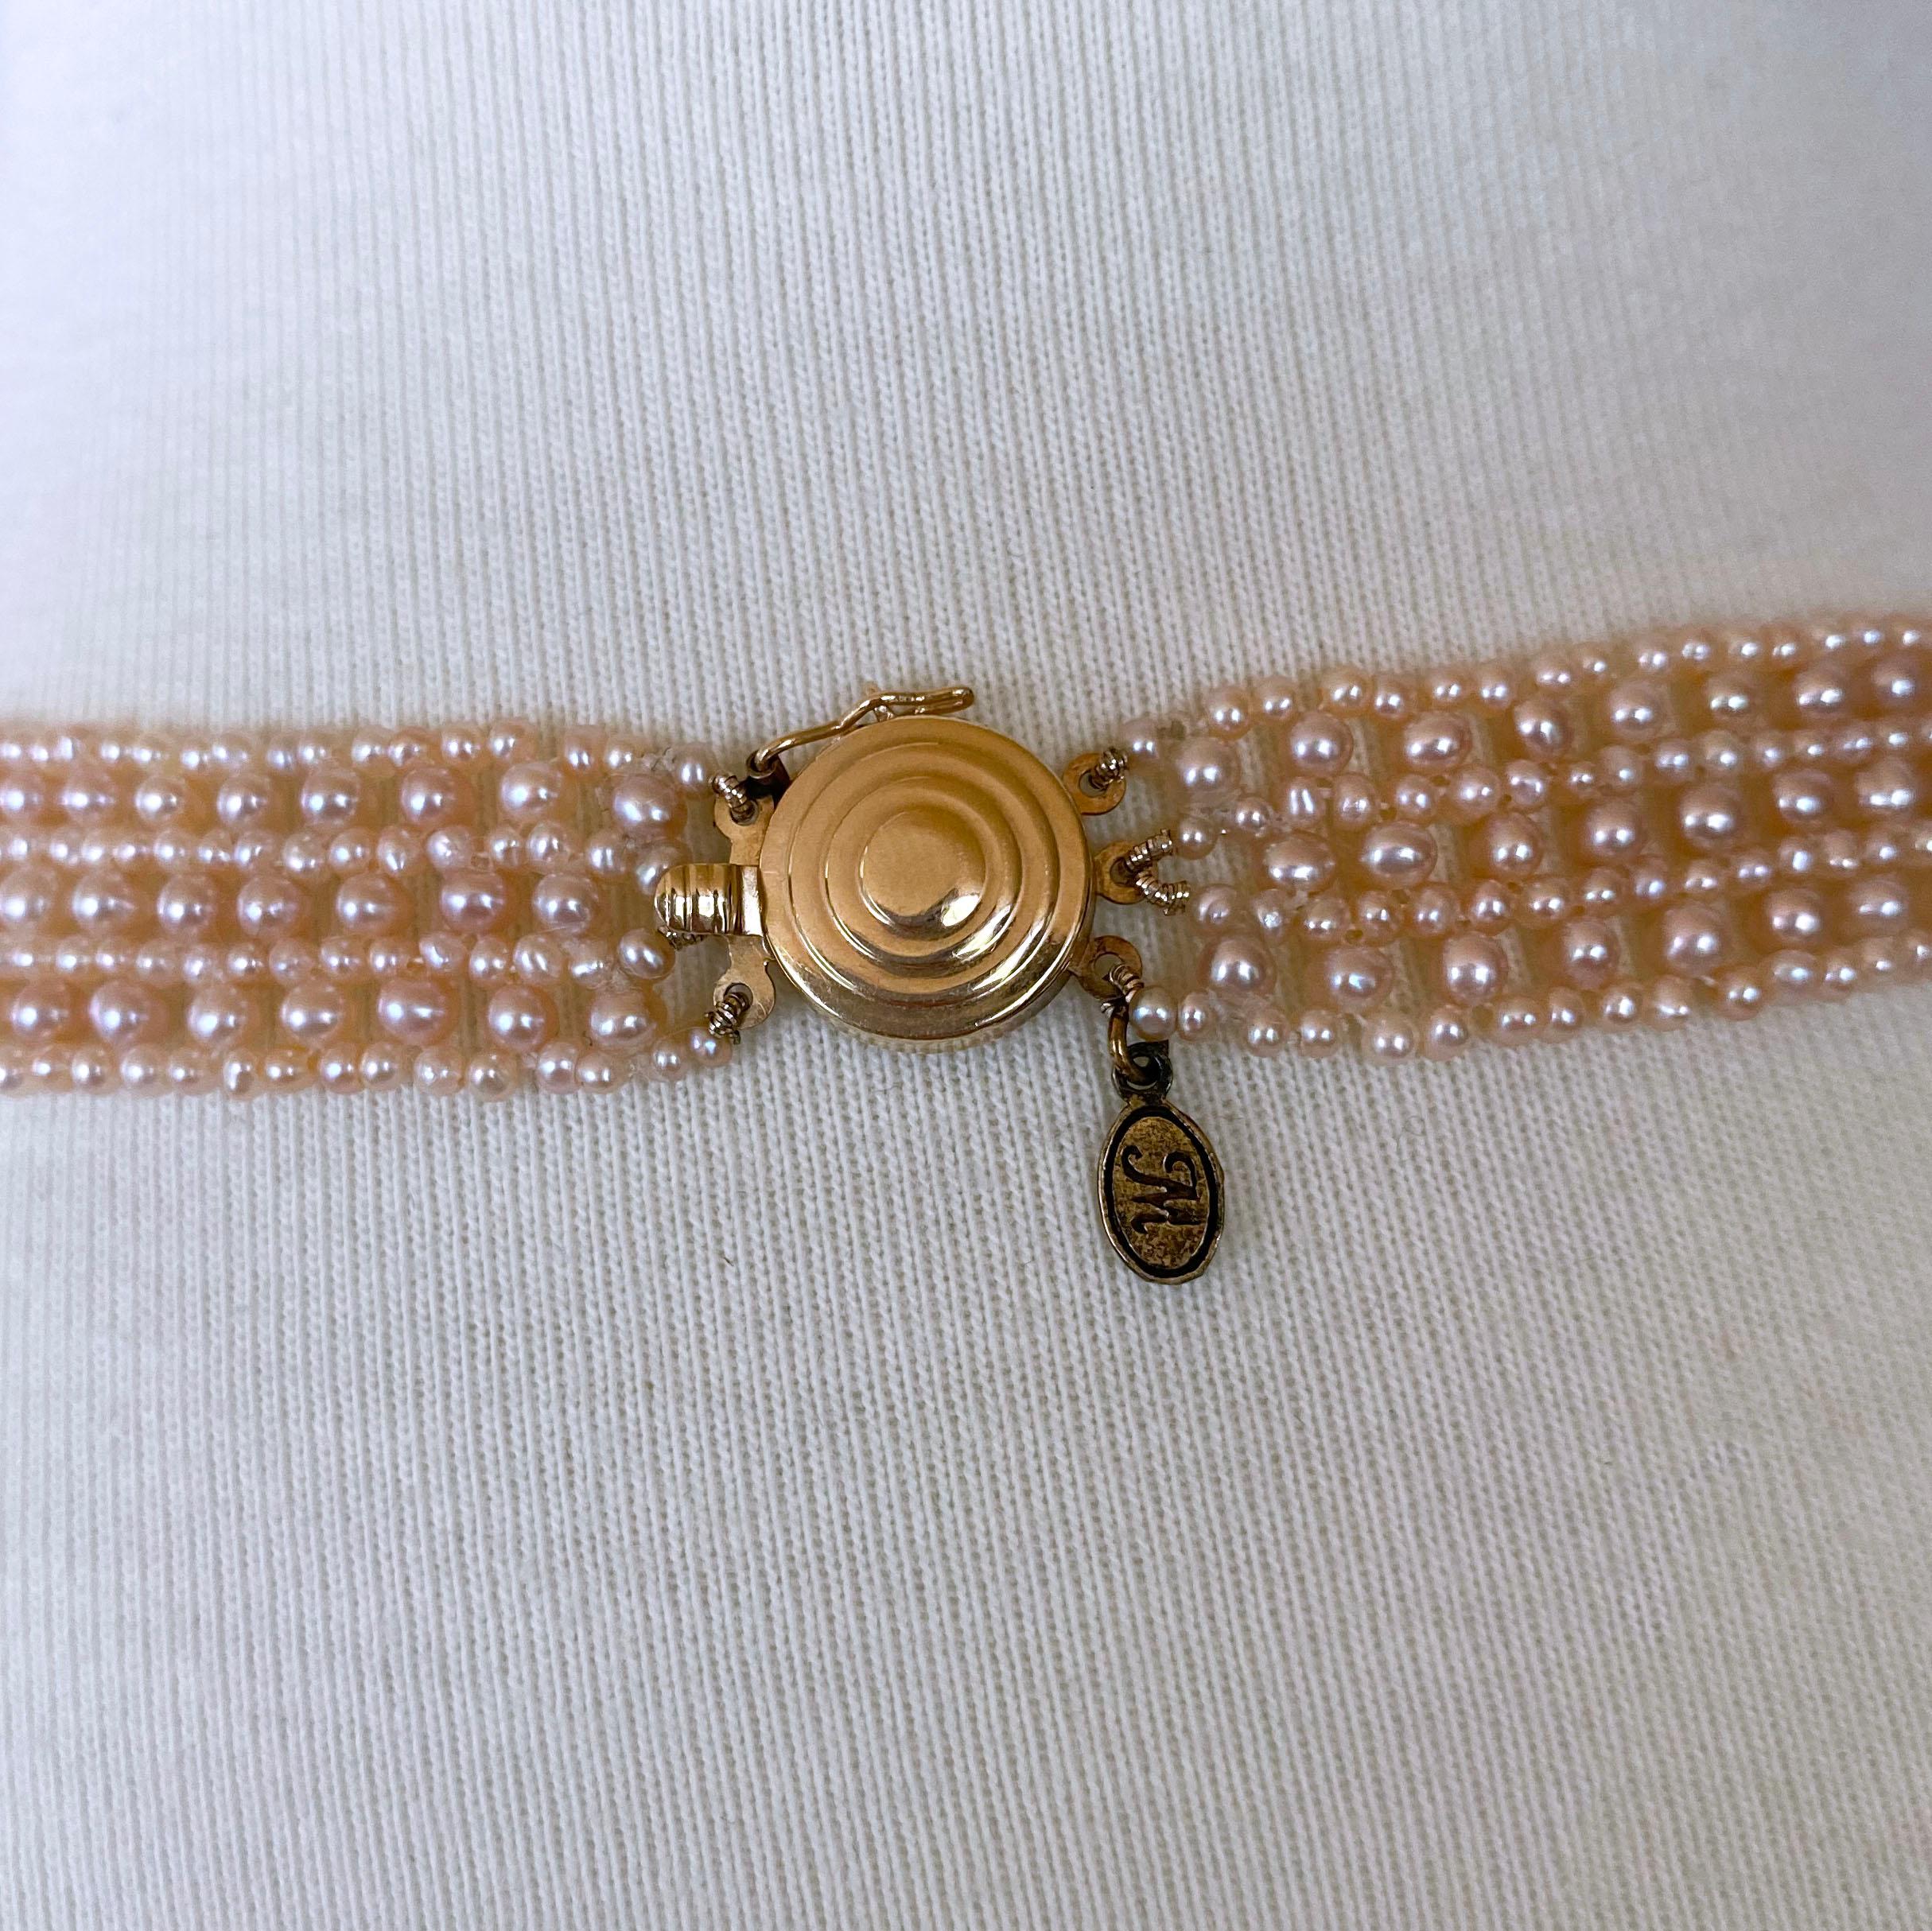 Bead Marina J. Pink Pearl Woven 'V' Necklace with 14k Gold Clasp & Vintage Brooch